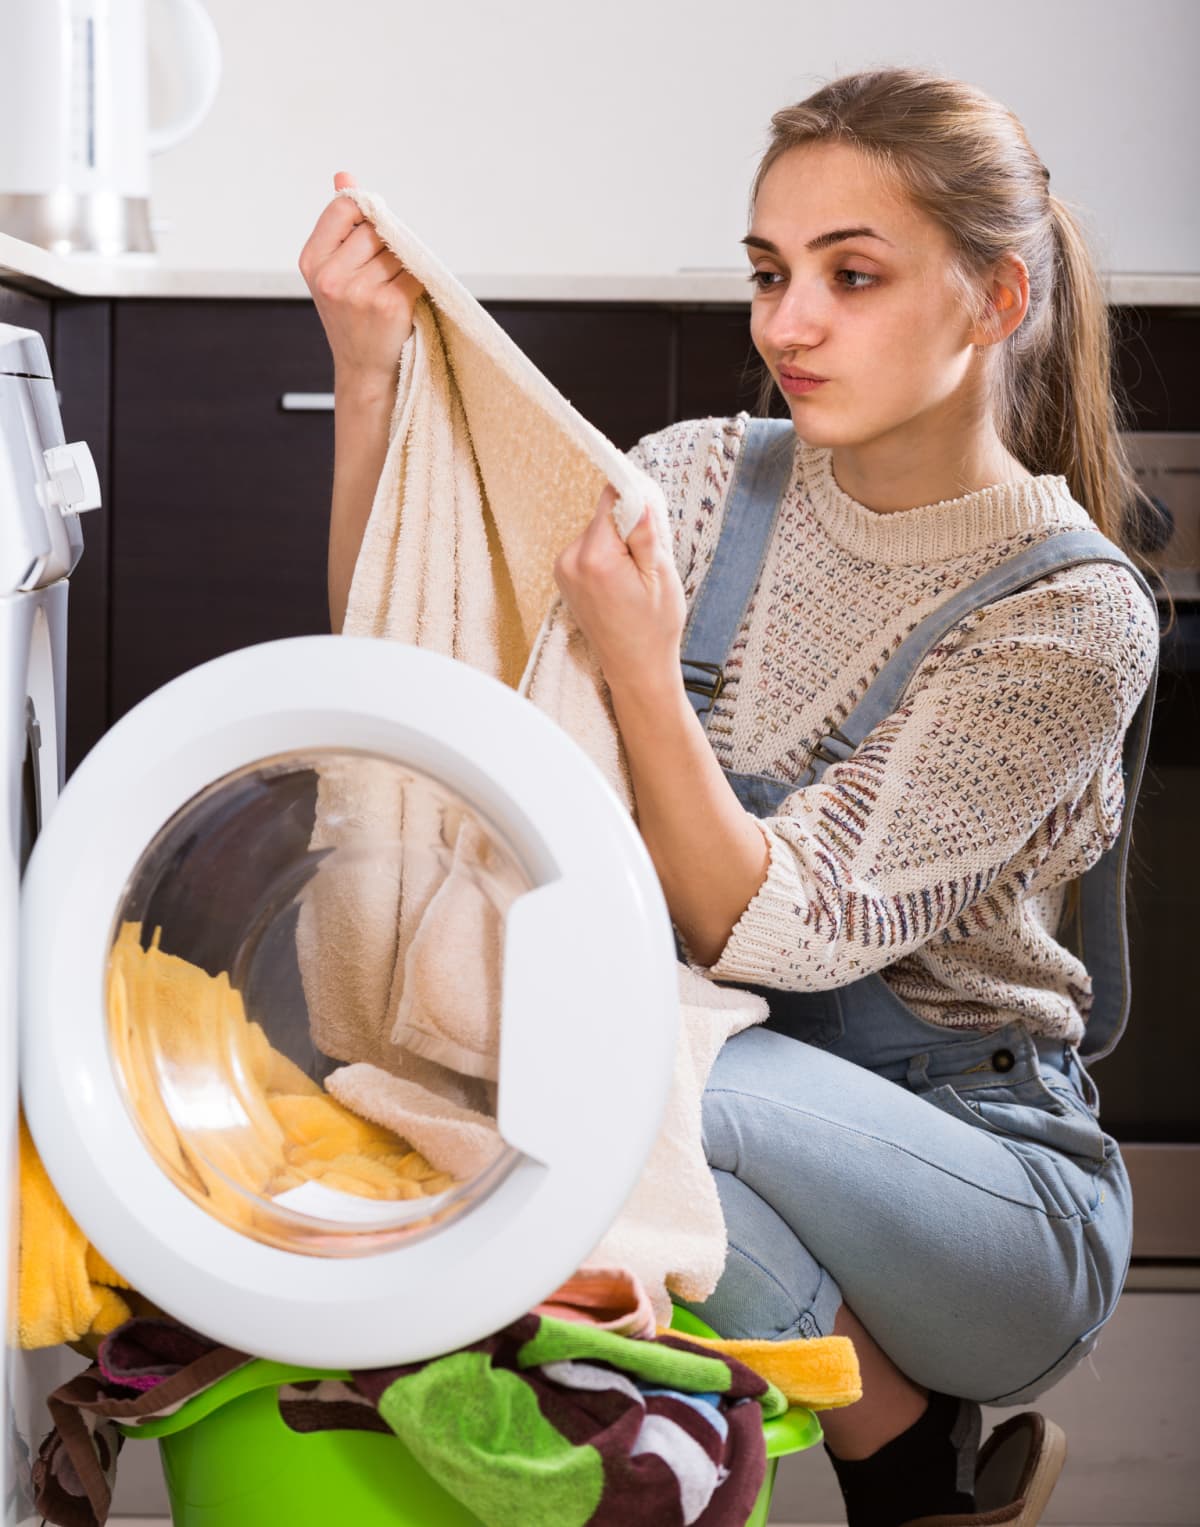 person looking unhappily at stained laundry